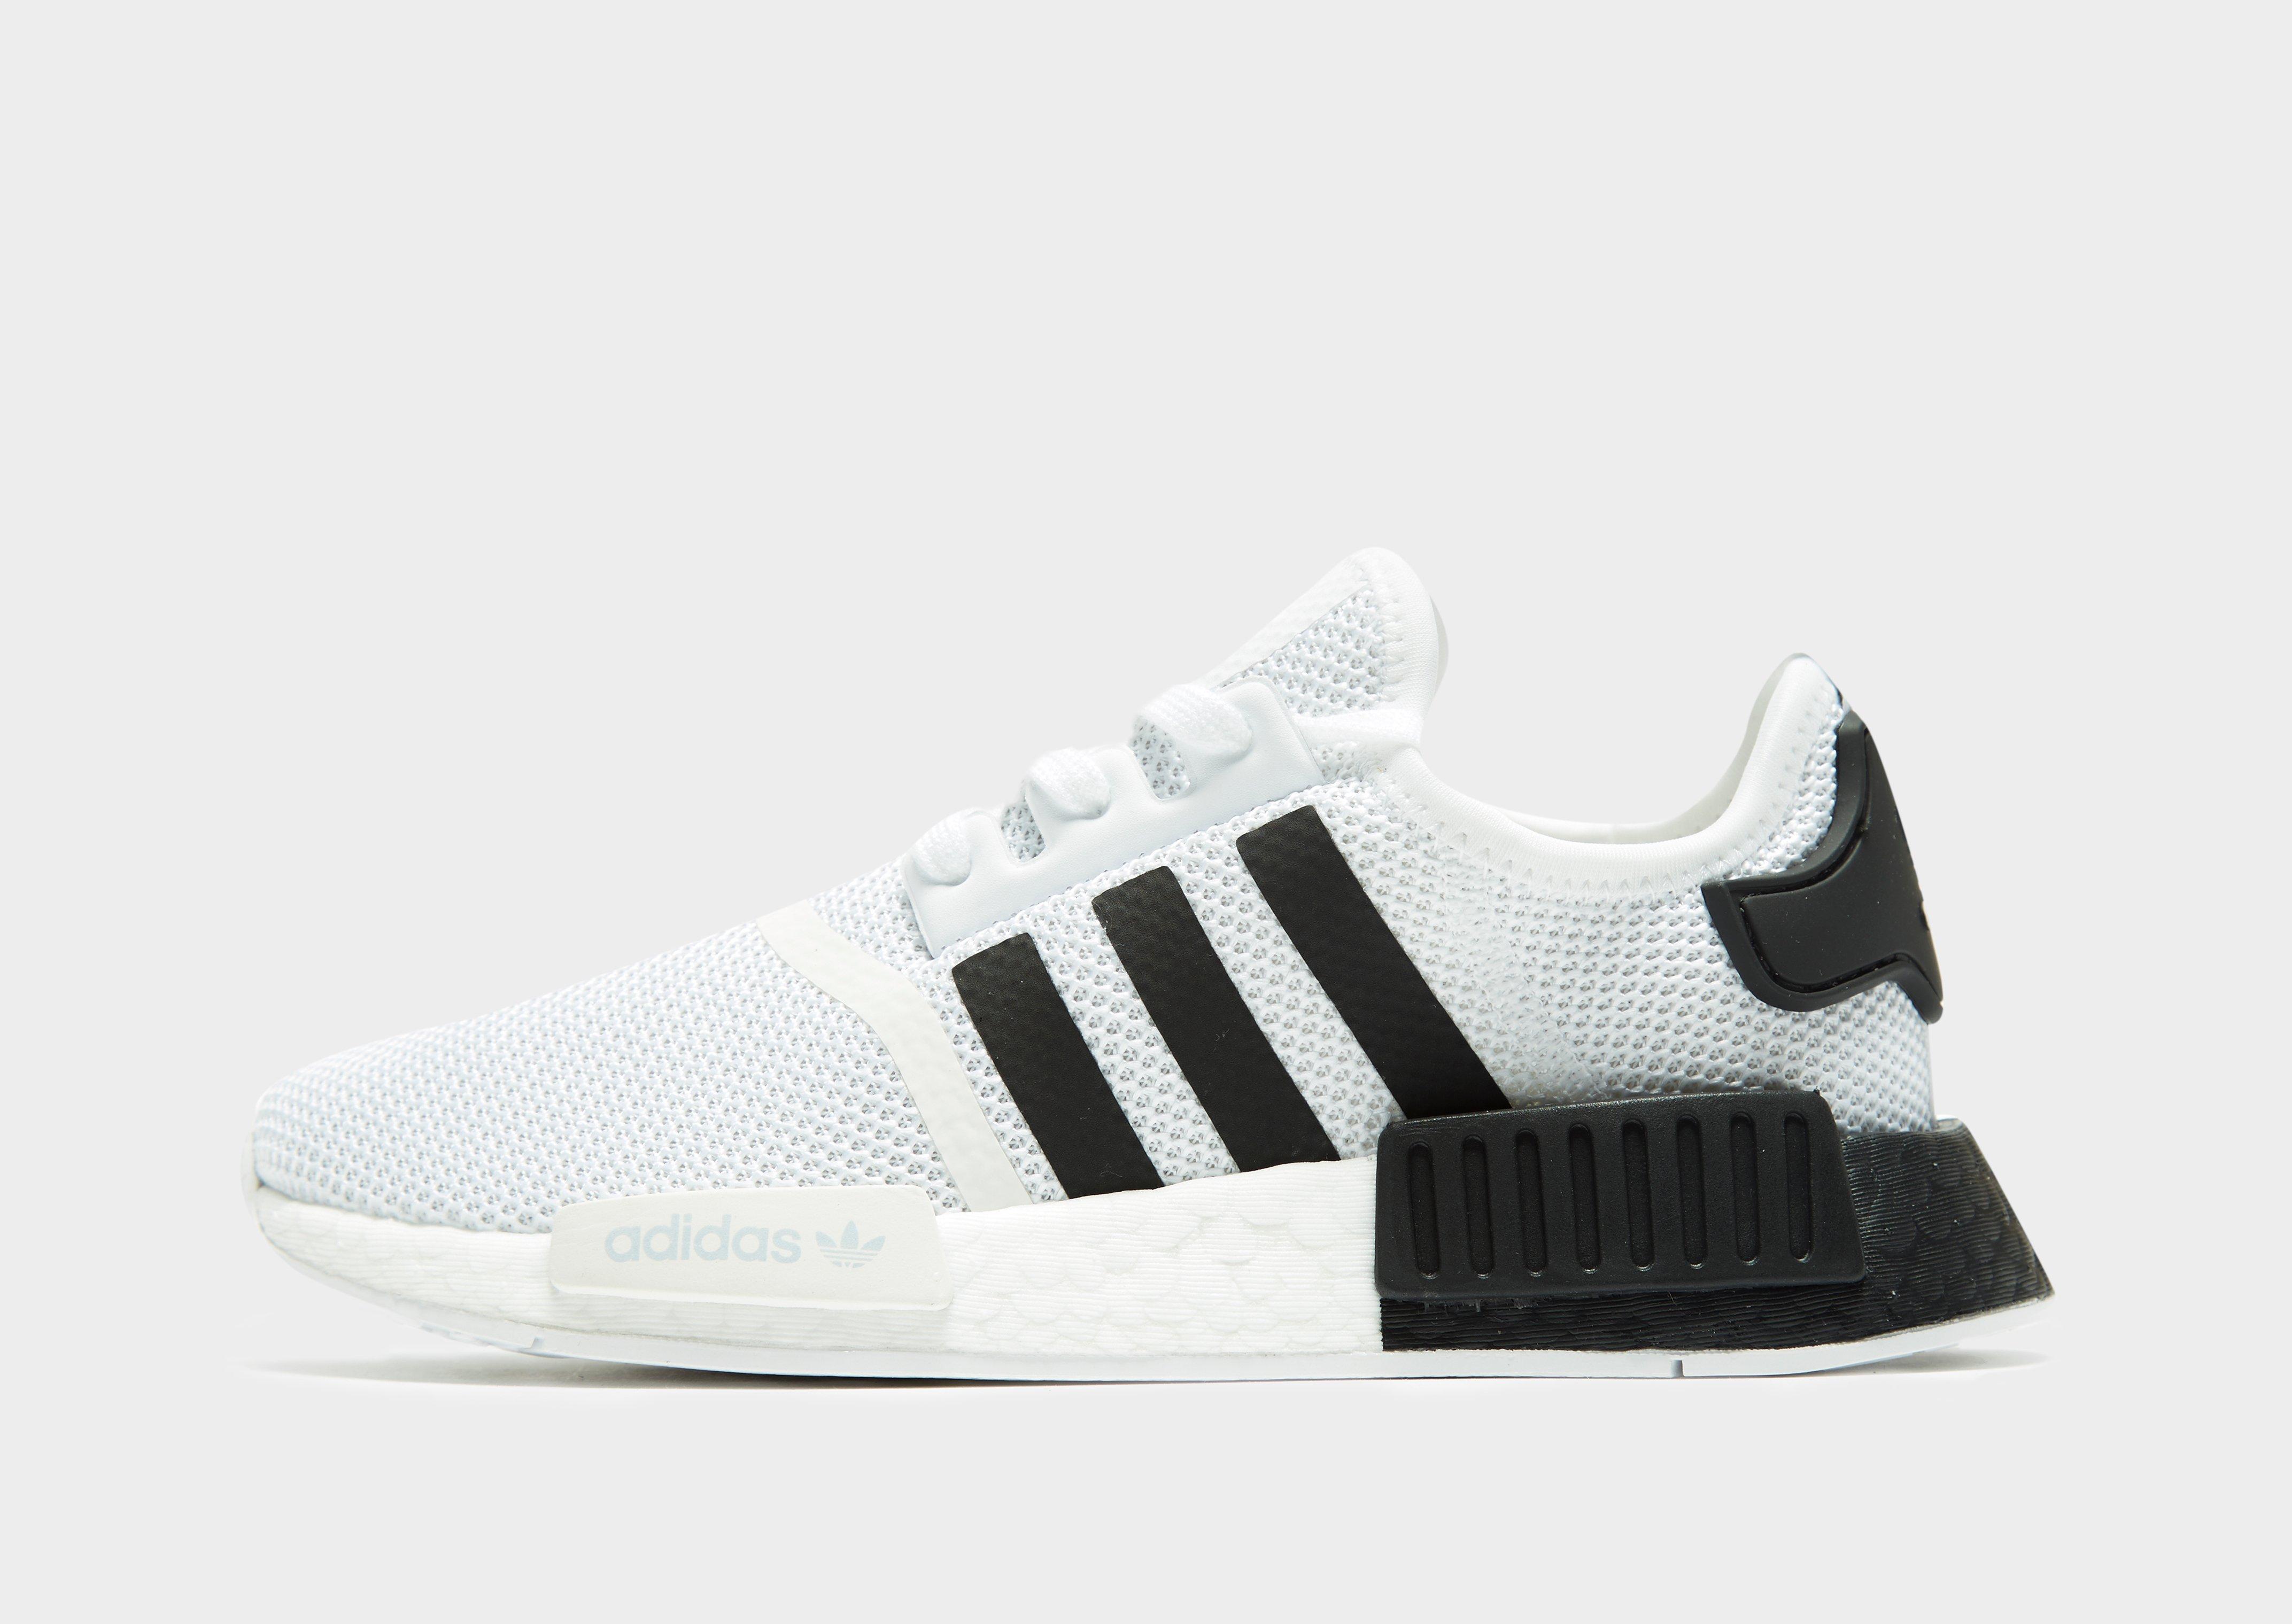 SH Adidas NMD R1 Boost casual breathable running shoes men and Womenshoes FV2548 shrimp skin